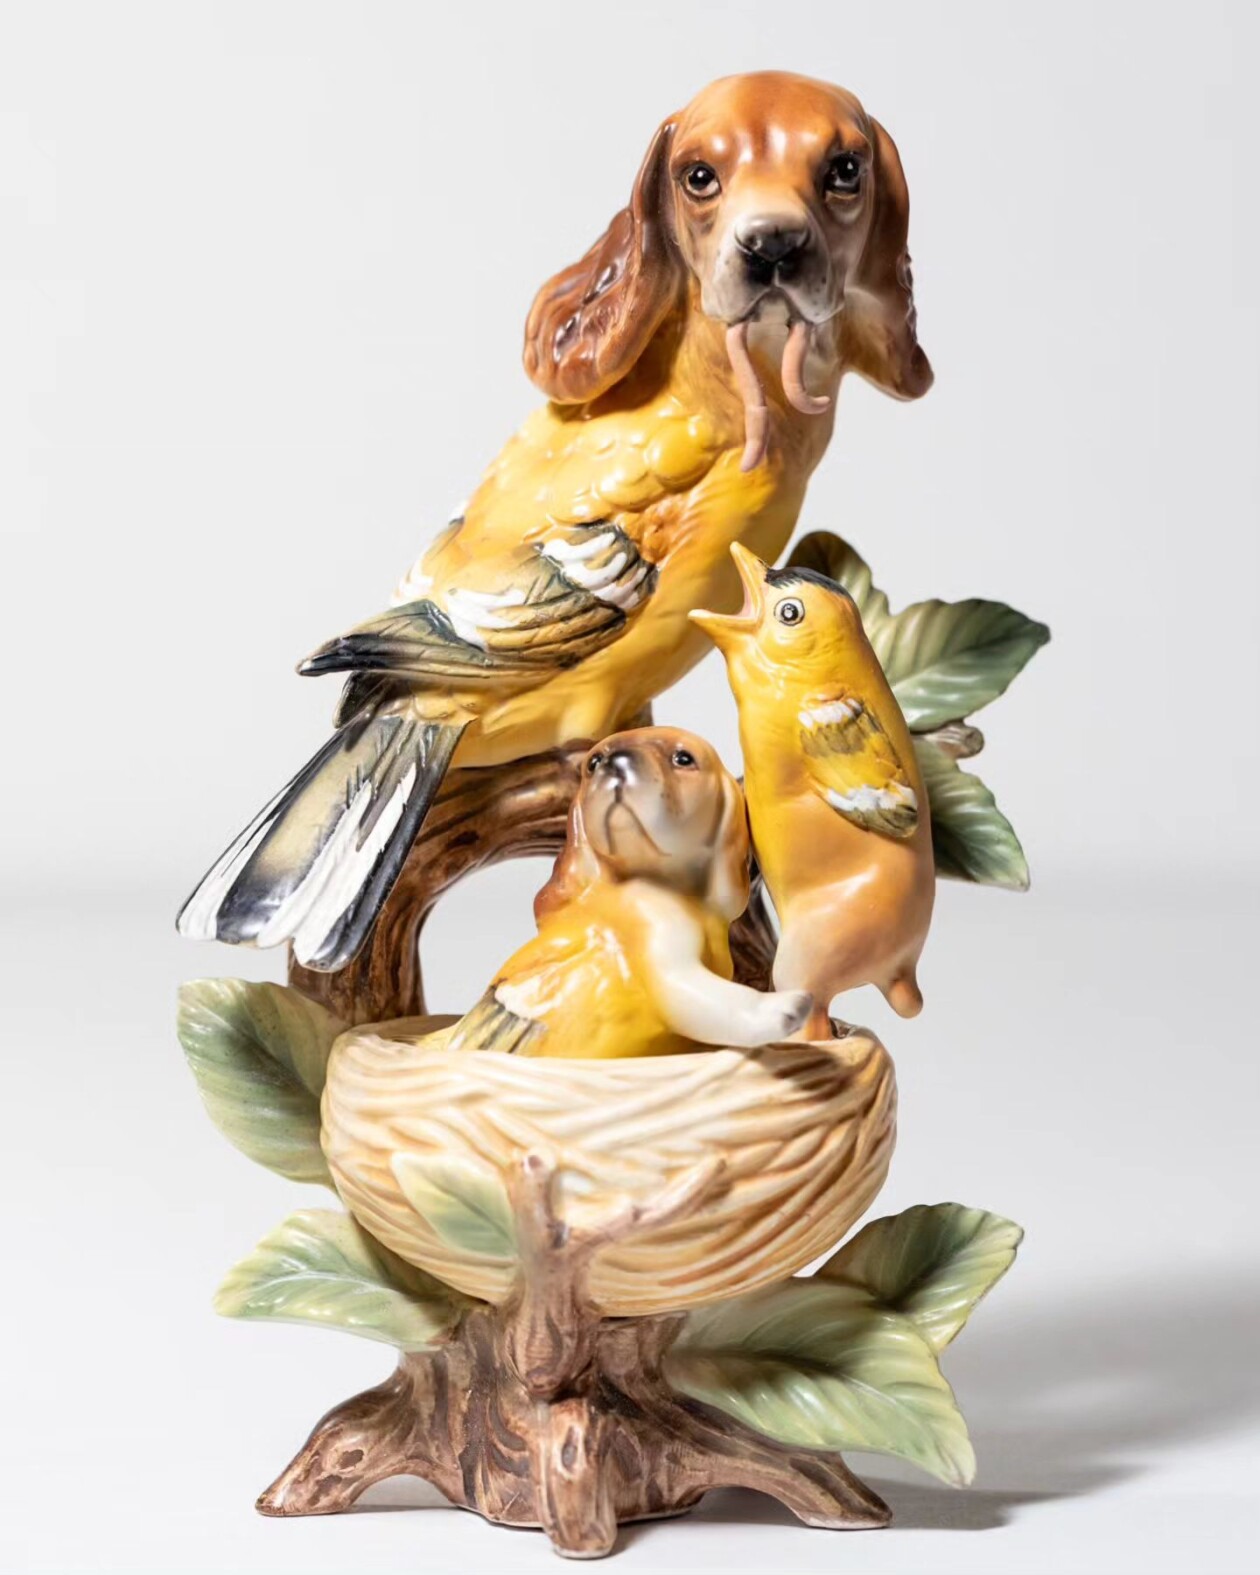 Debra Broz Brings To Life Uncanny Beings By Creating Unexpected Mashups Between Animals, Plants, And Humans (3)